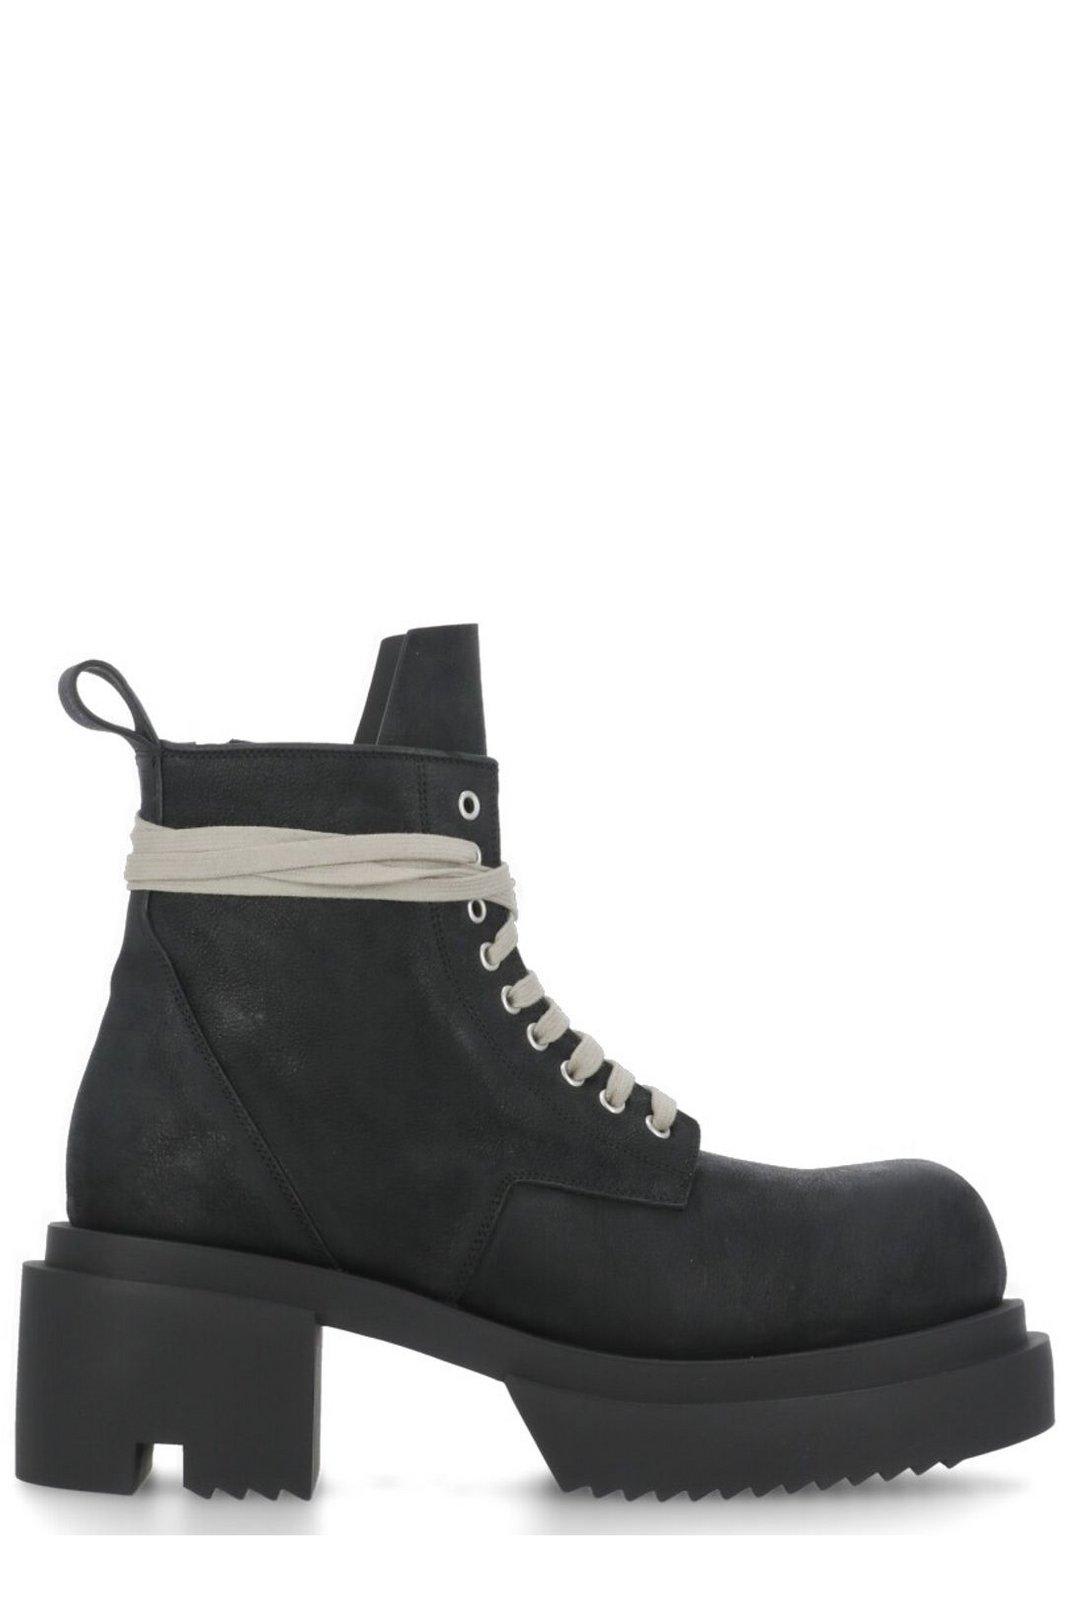 RICK OWENS LOW ARMY BOGUN LACE-UP BOOTS